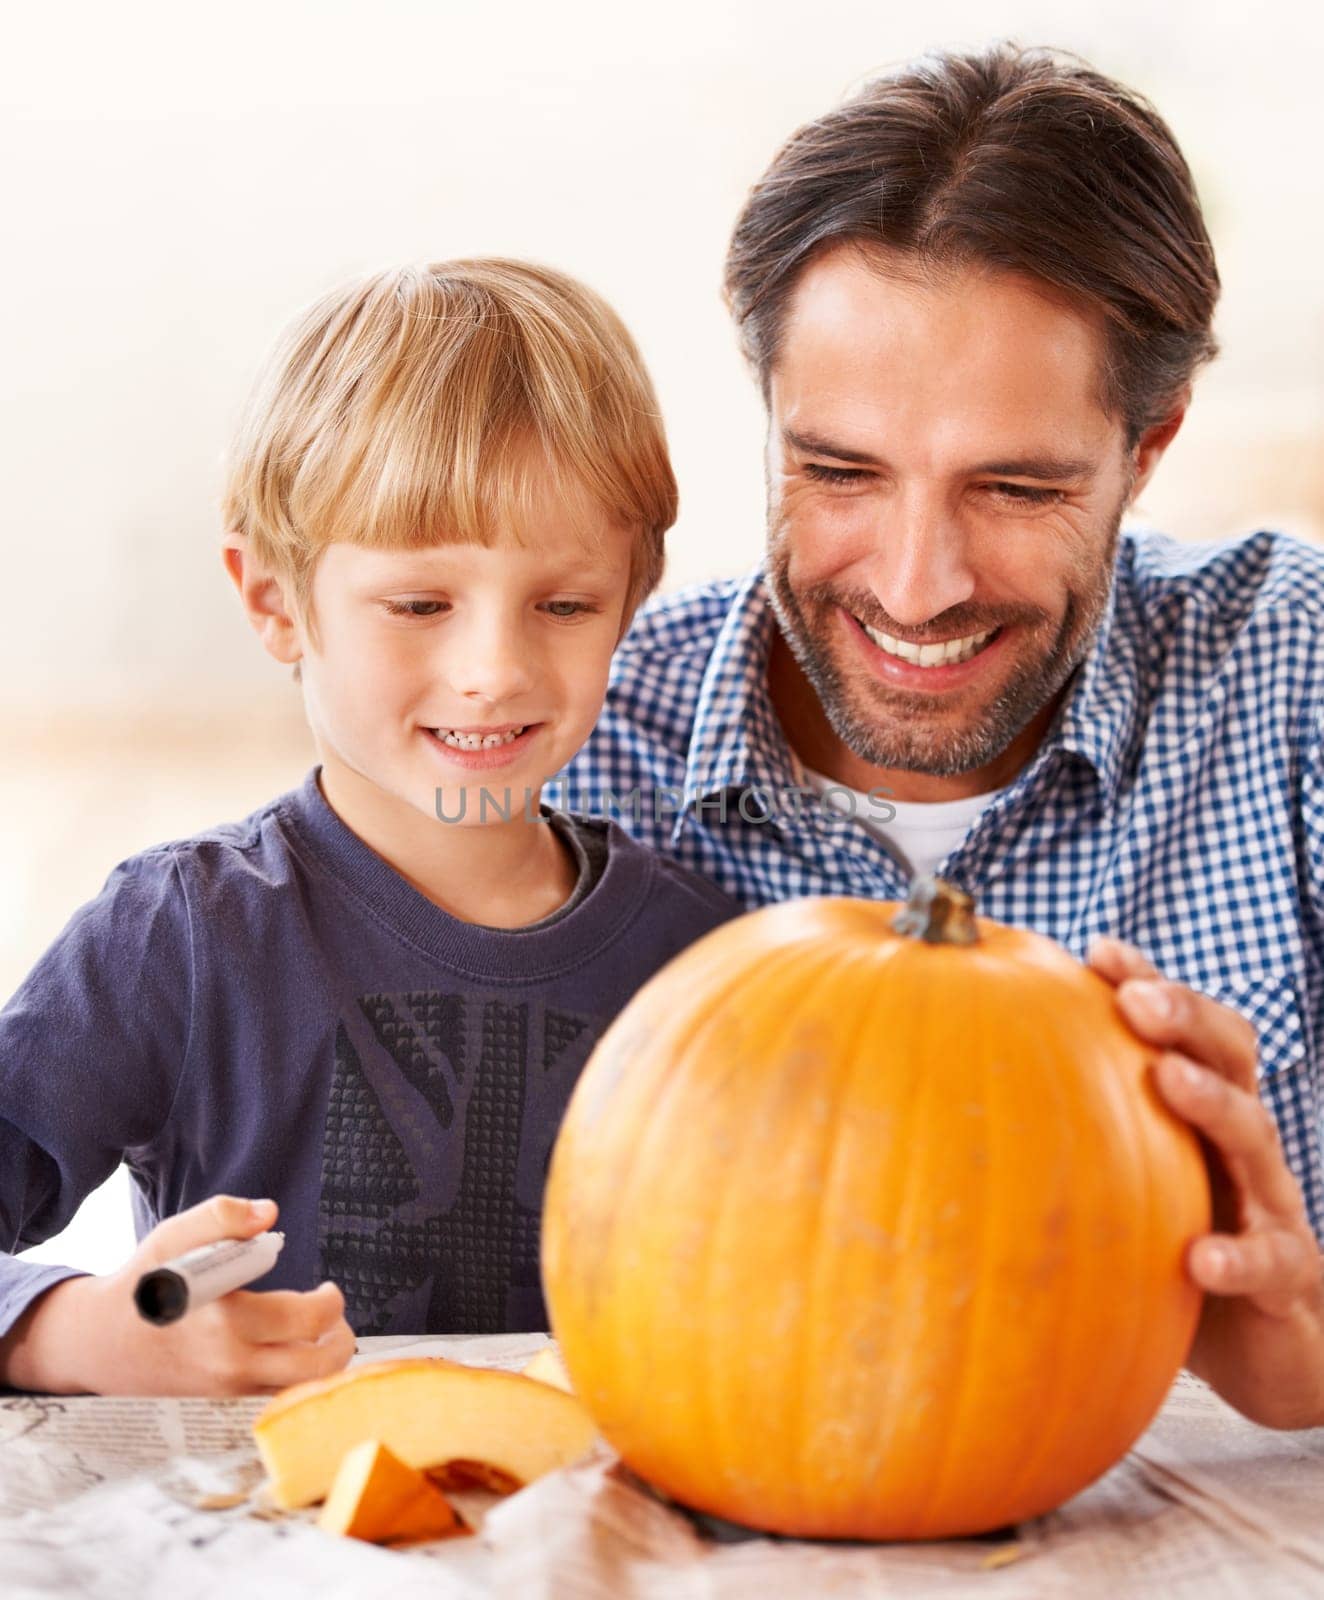 That looks really great. A father and son marking a pumpkin at home for halloween